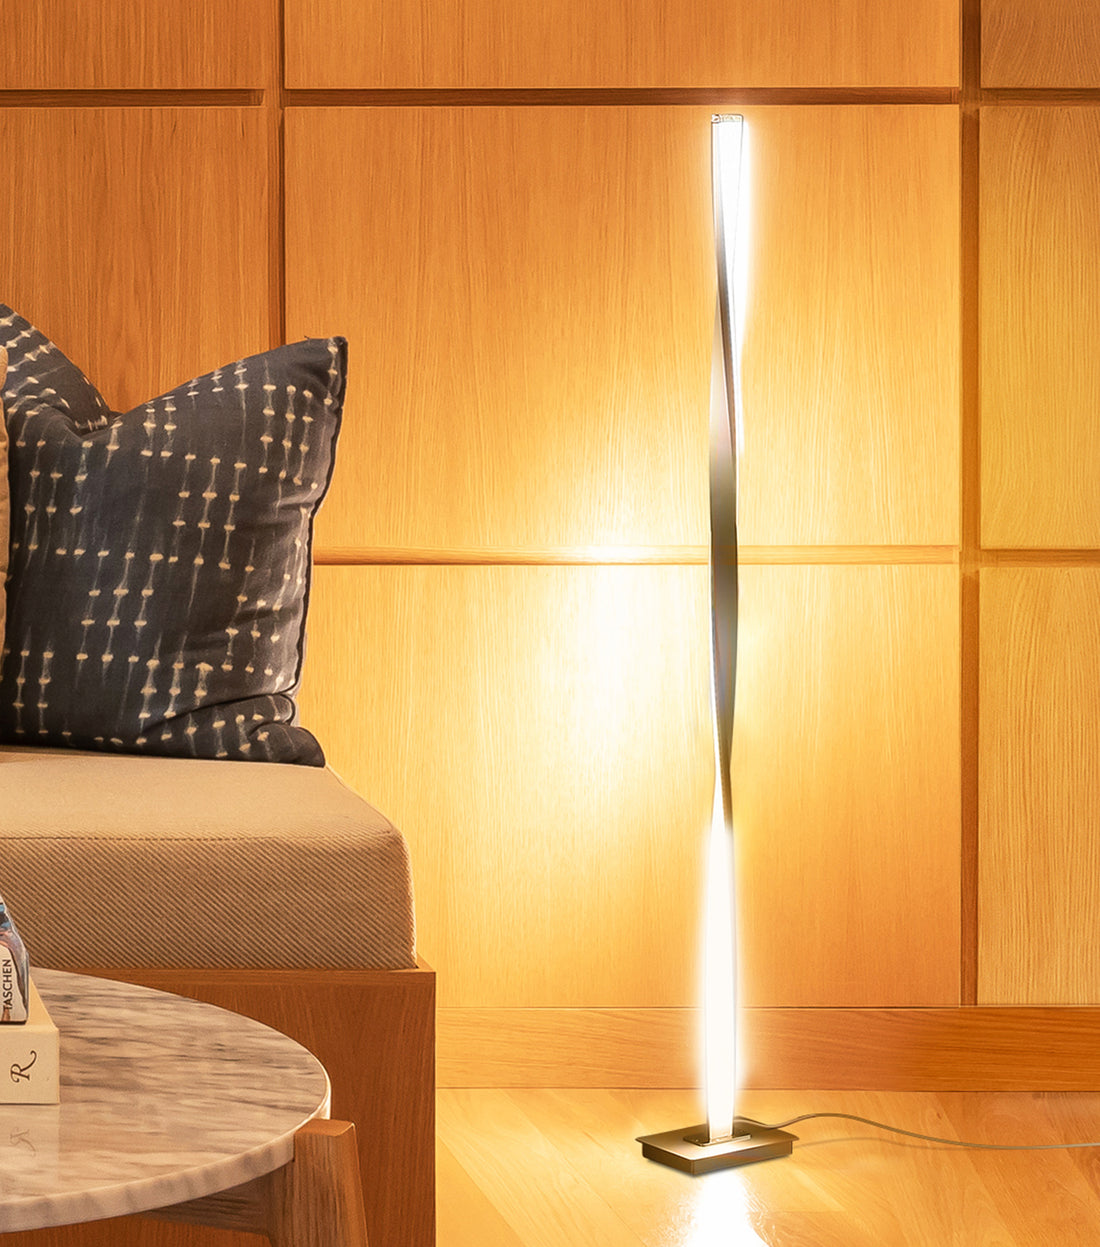 Brightech Helix - Modern LED Floor Lamp for Living Room Bright Lighting - Get Compliments: Unique, 48" Tall Light for Bedrooms, Offices - Dimmable, Contemporary Indoor Pole Lamp